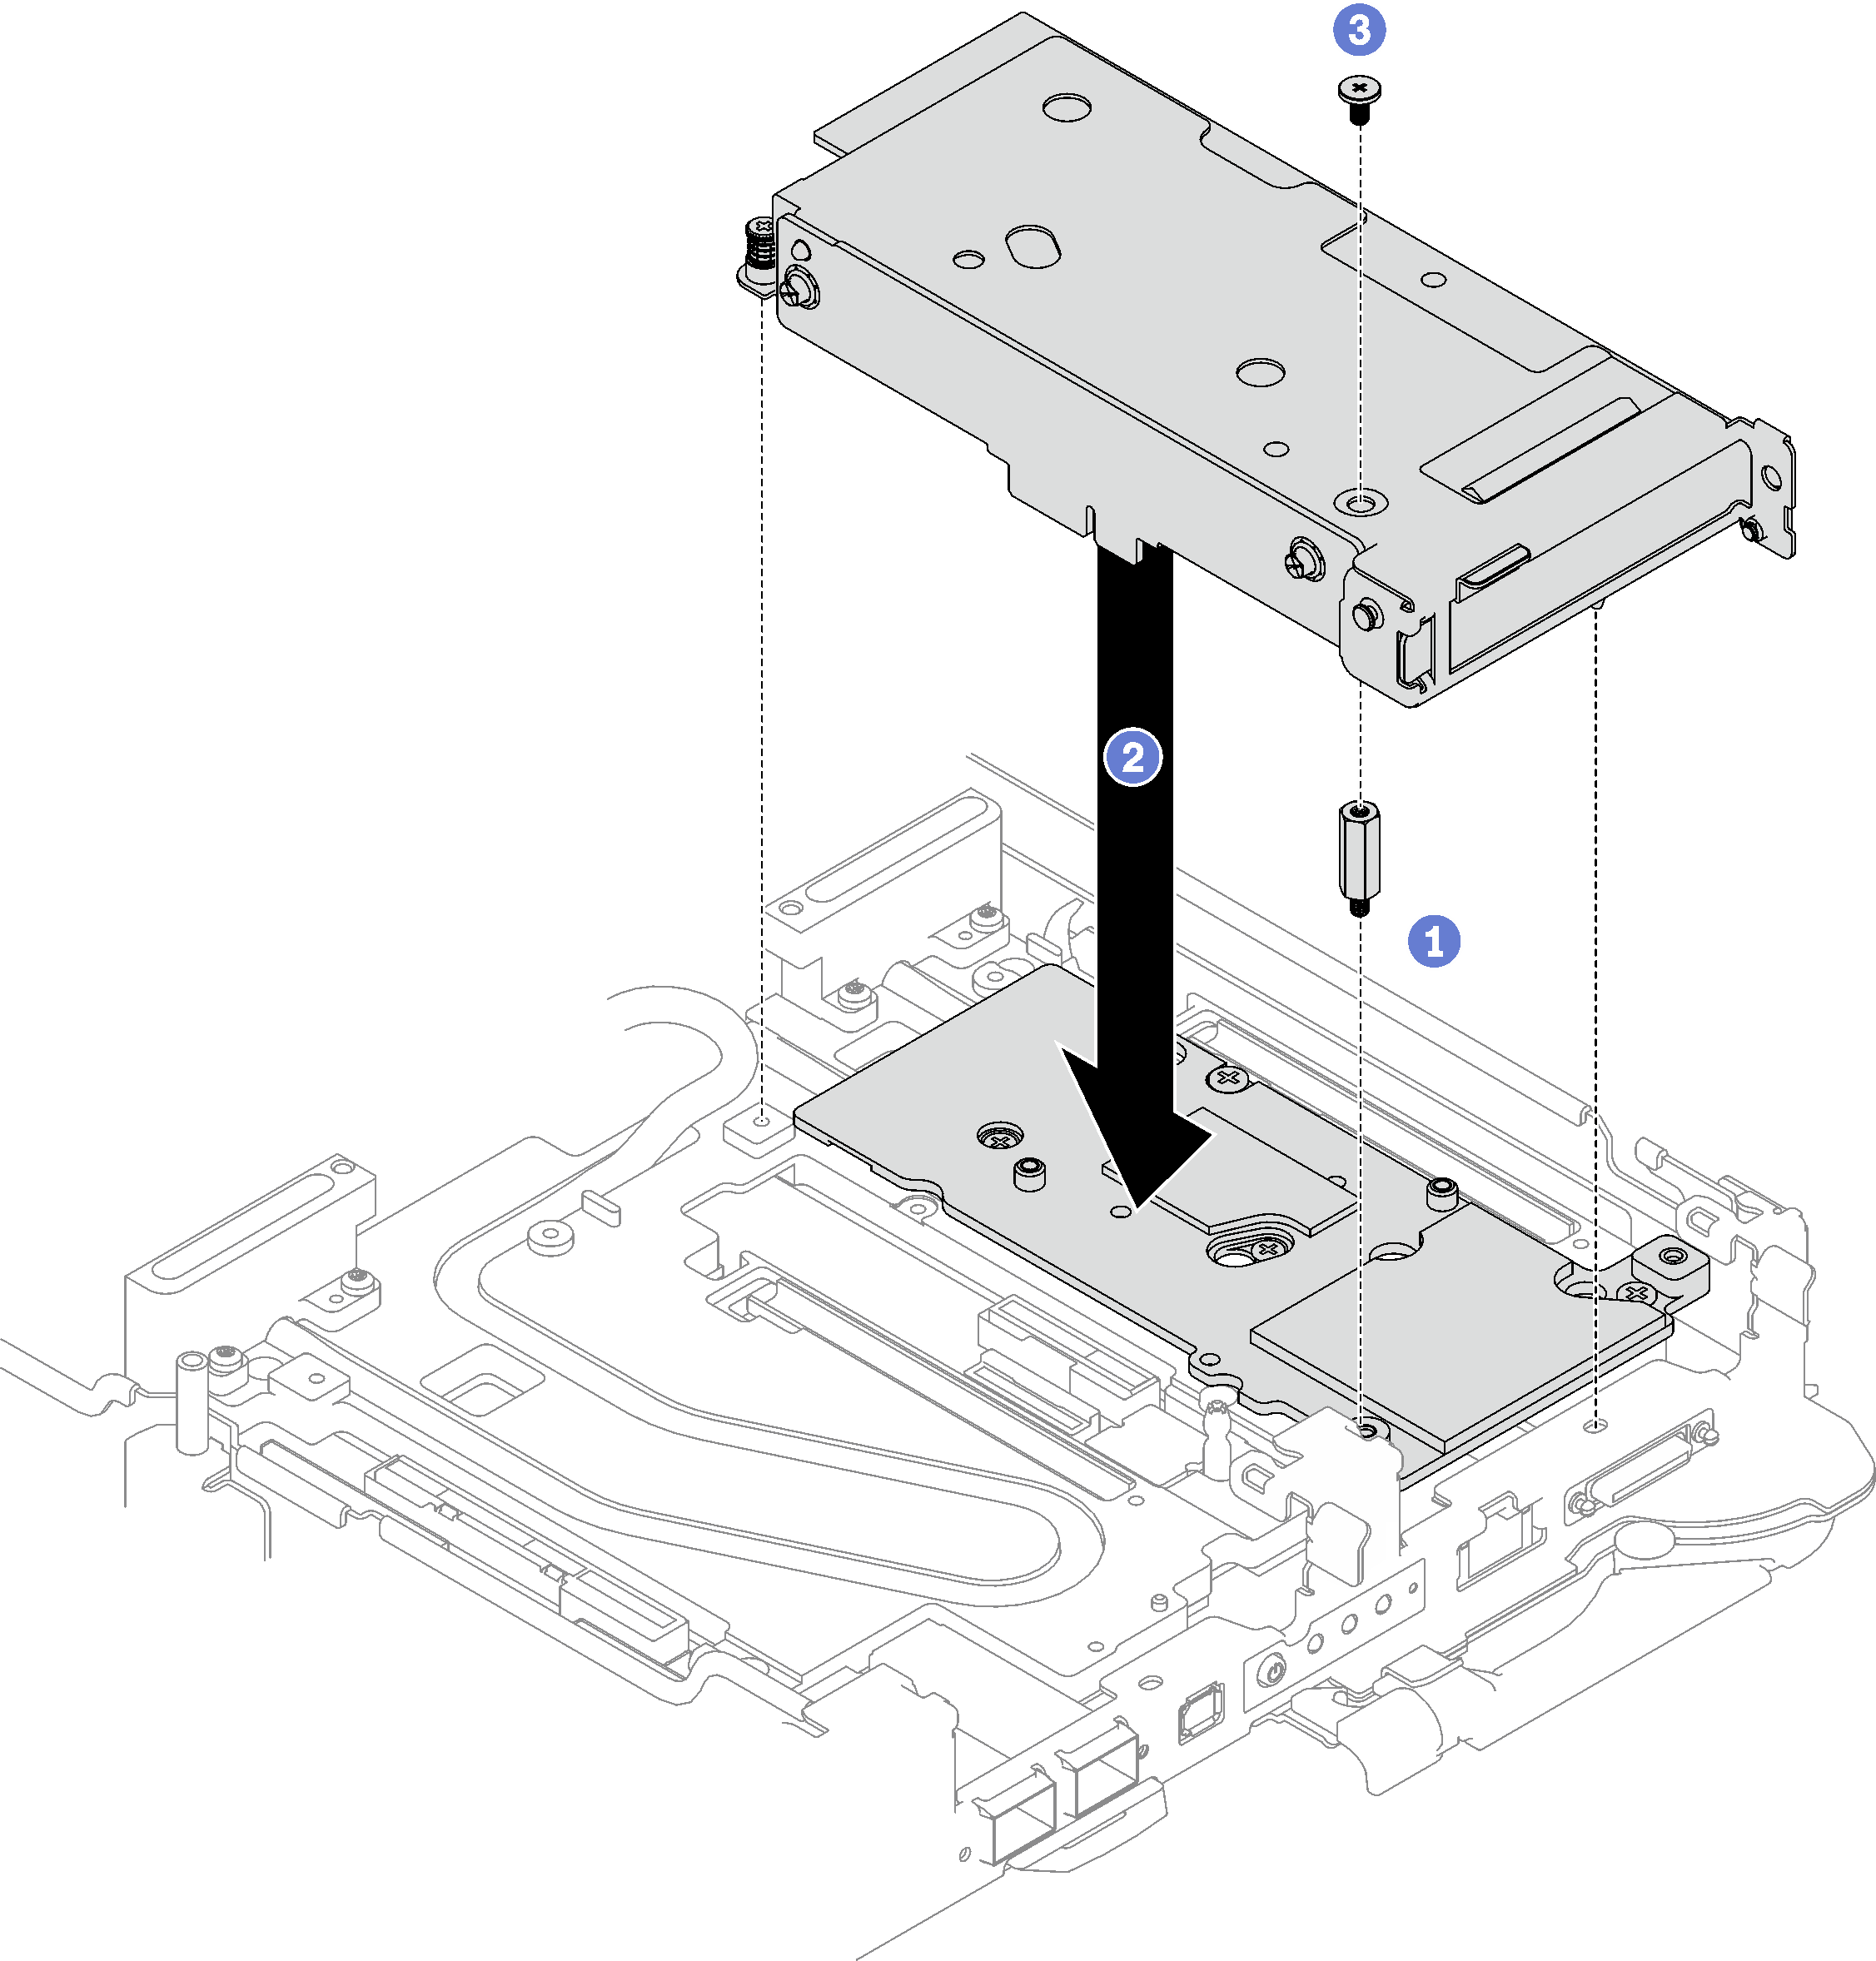 PCIe riser assembly installation